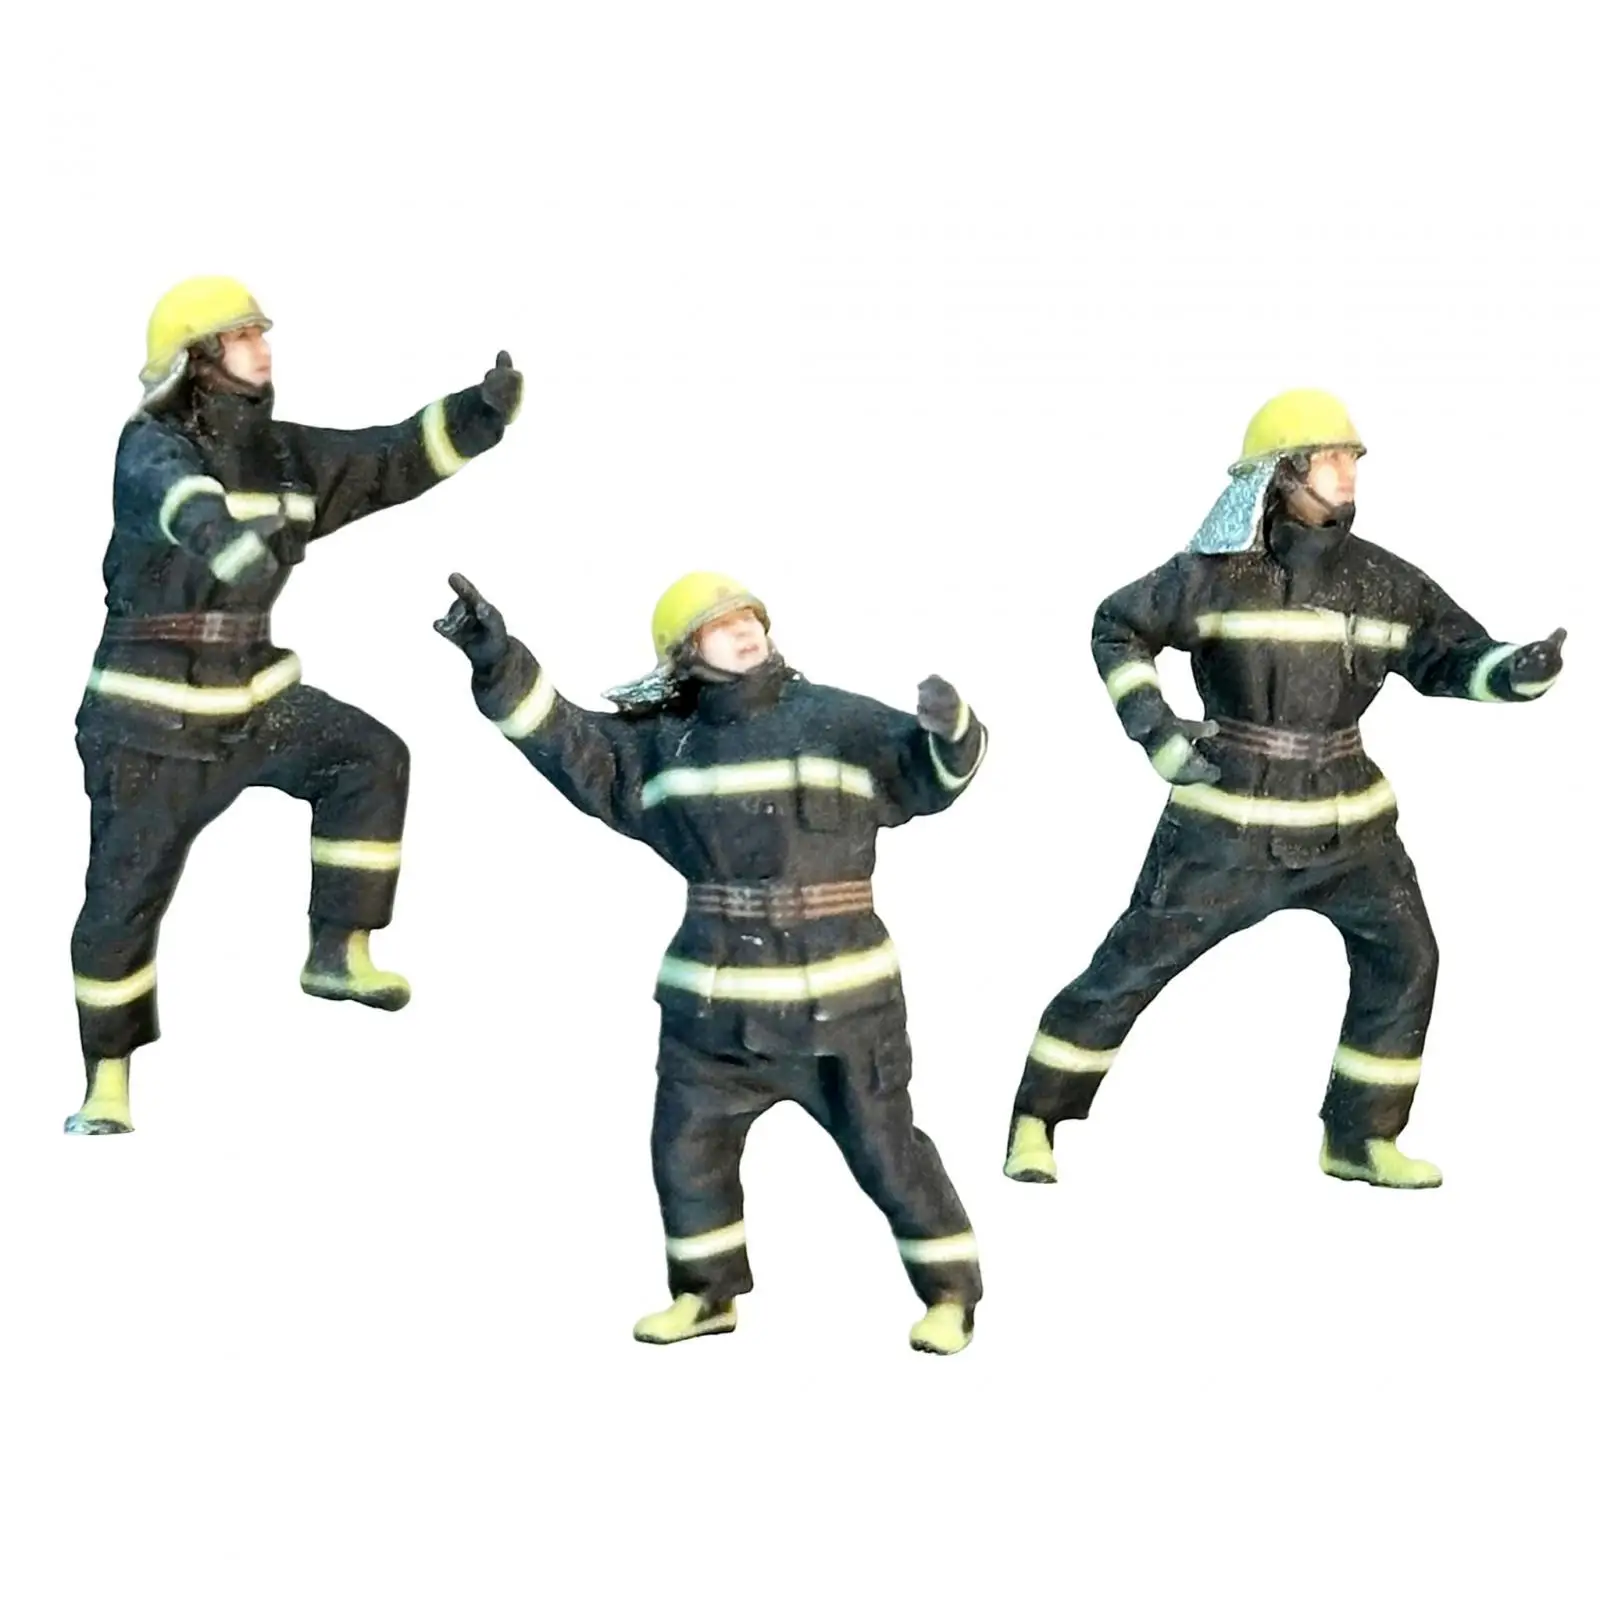 3x Miniature Firefighter Figures Collection Model Trains People Figures for Diorama Dollhouse DIY Scene Photography Props Decor